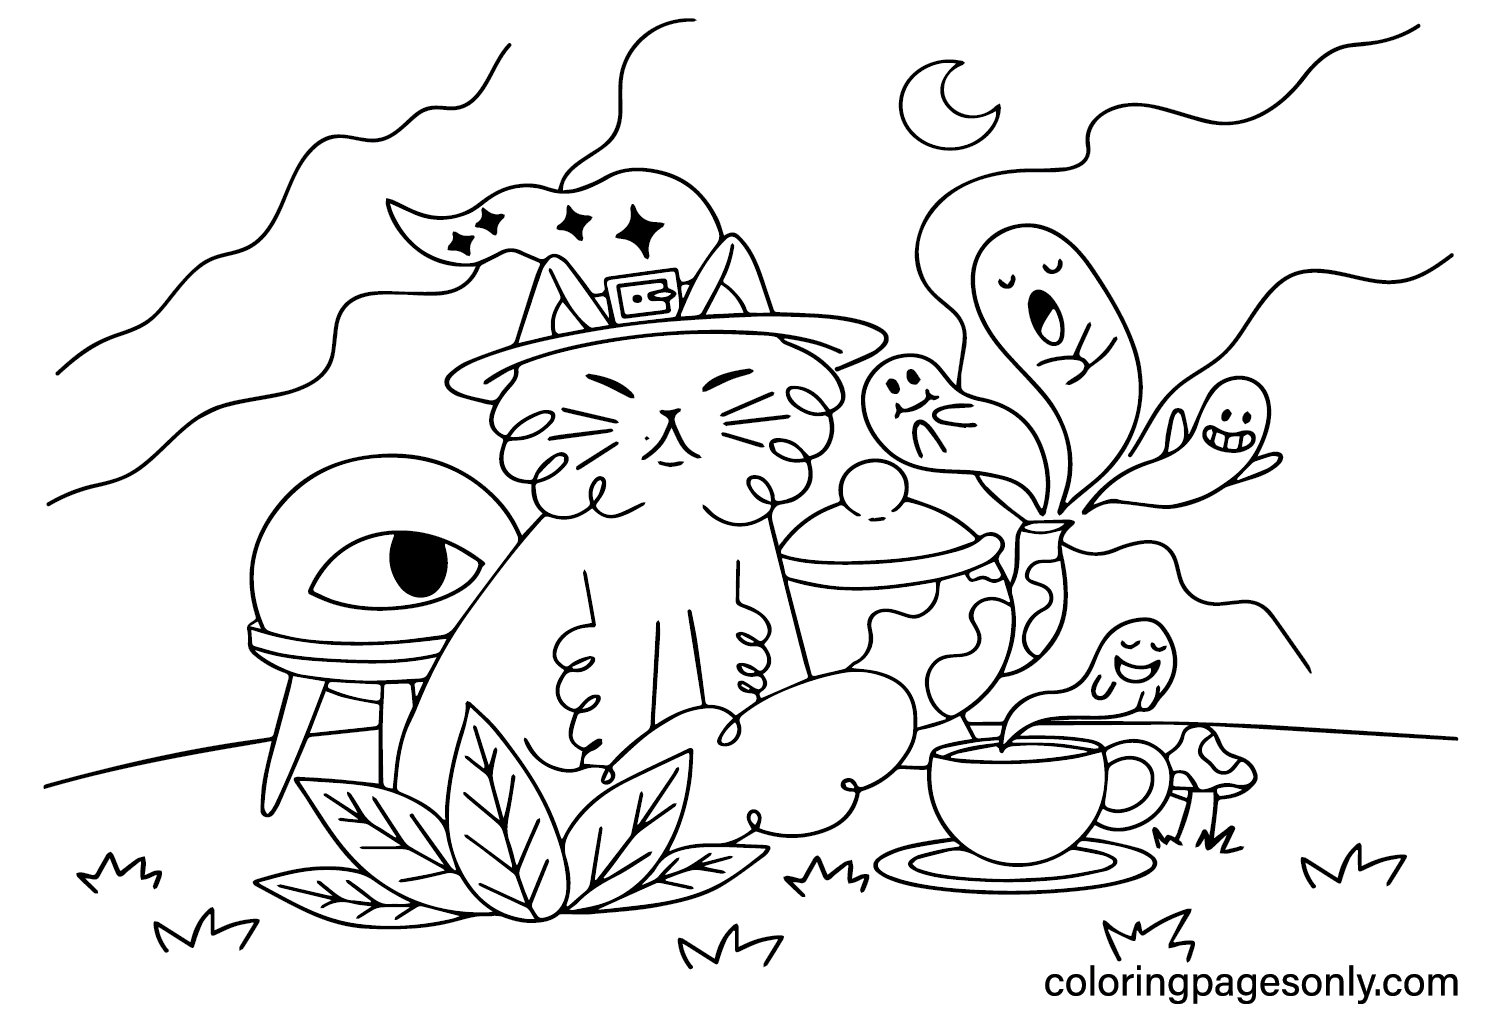 Cute Halloween Coloring Pages for Adults